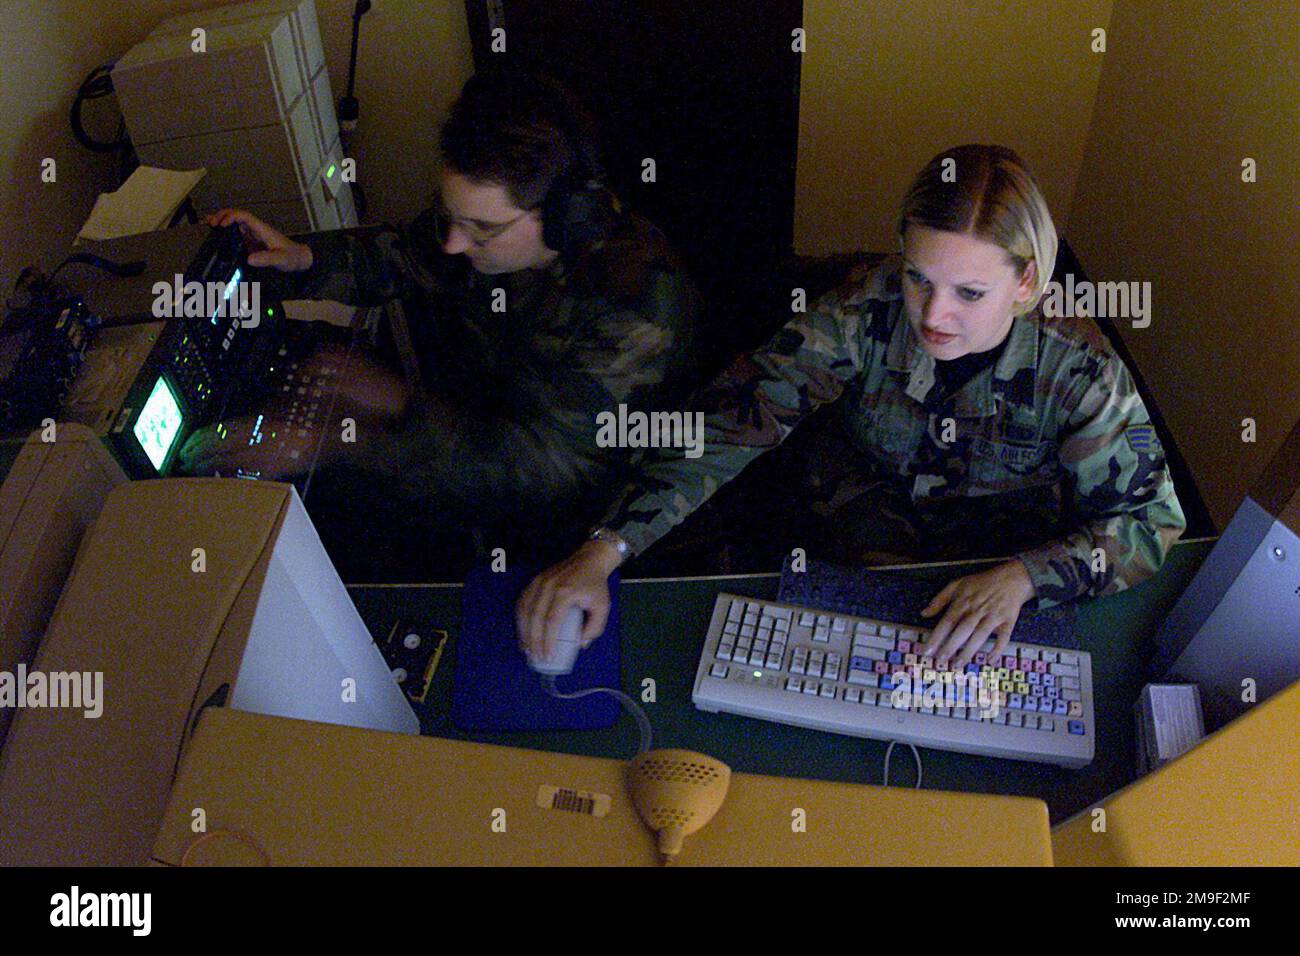 000522-F-4884R-001. [Complete] Scene Caption: SENIOR AIRMAN (SRA) Vanessa Braly, USAF, (right), assists STAFF Sergeant (SSGT) Mike Smith, USAF, editor, review footage captured during COMBINED ENDEAVOR (CE) 2000, at Lager Aulenbach, Germany. Both are with the 1ST Combat Camera Squadron, deployed to provide video and still support for the exercise. CE 2000, currently hosted by Germany, is the largest information and communication systems exercise in the world. This exercise is the sixth in a series of multinational communication interoperability workshops where military personnel from 35 nations Stock Photo